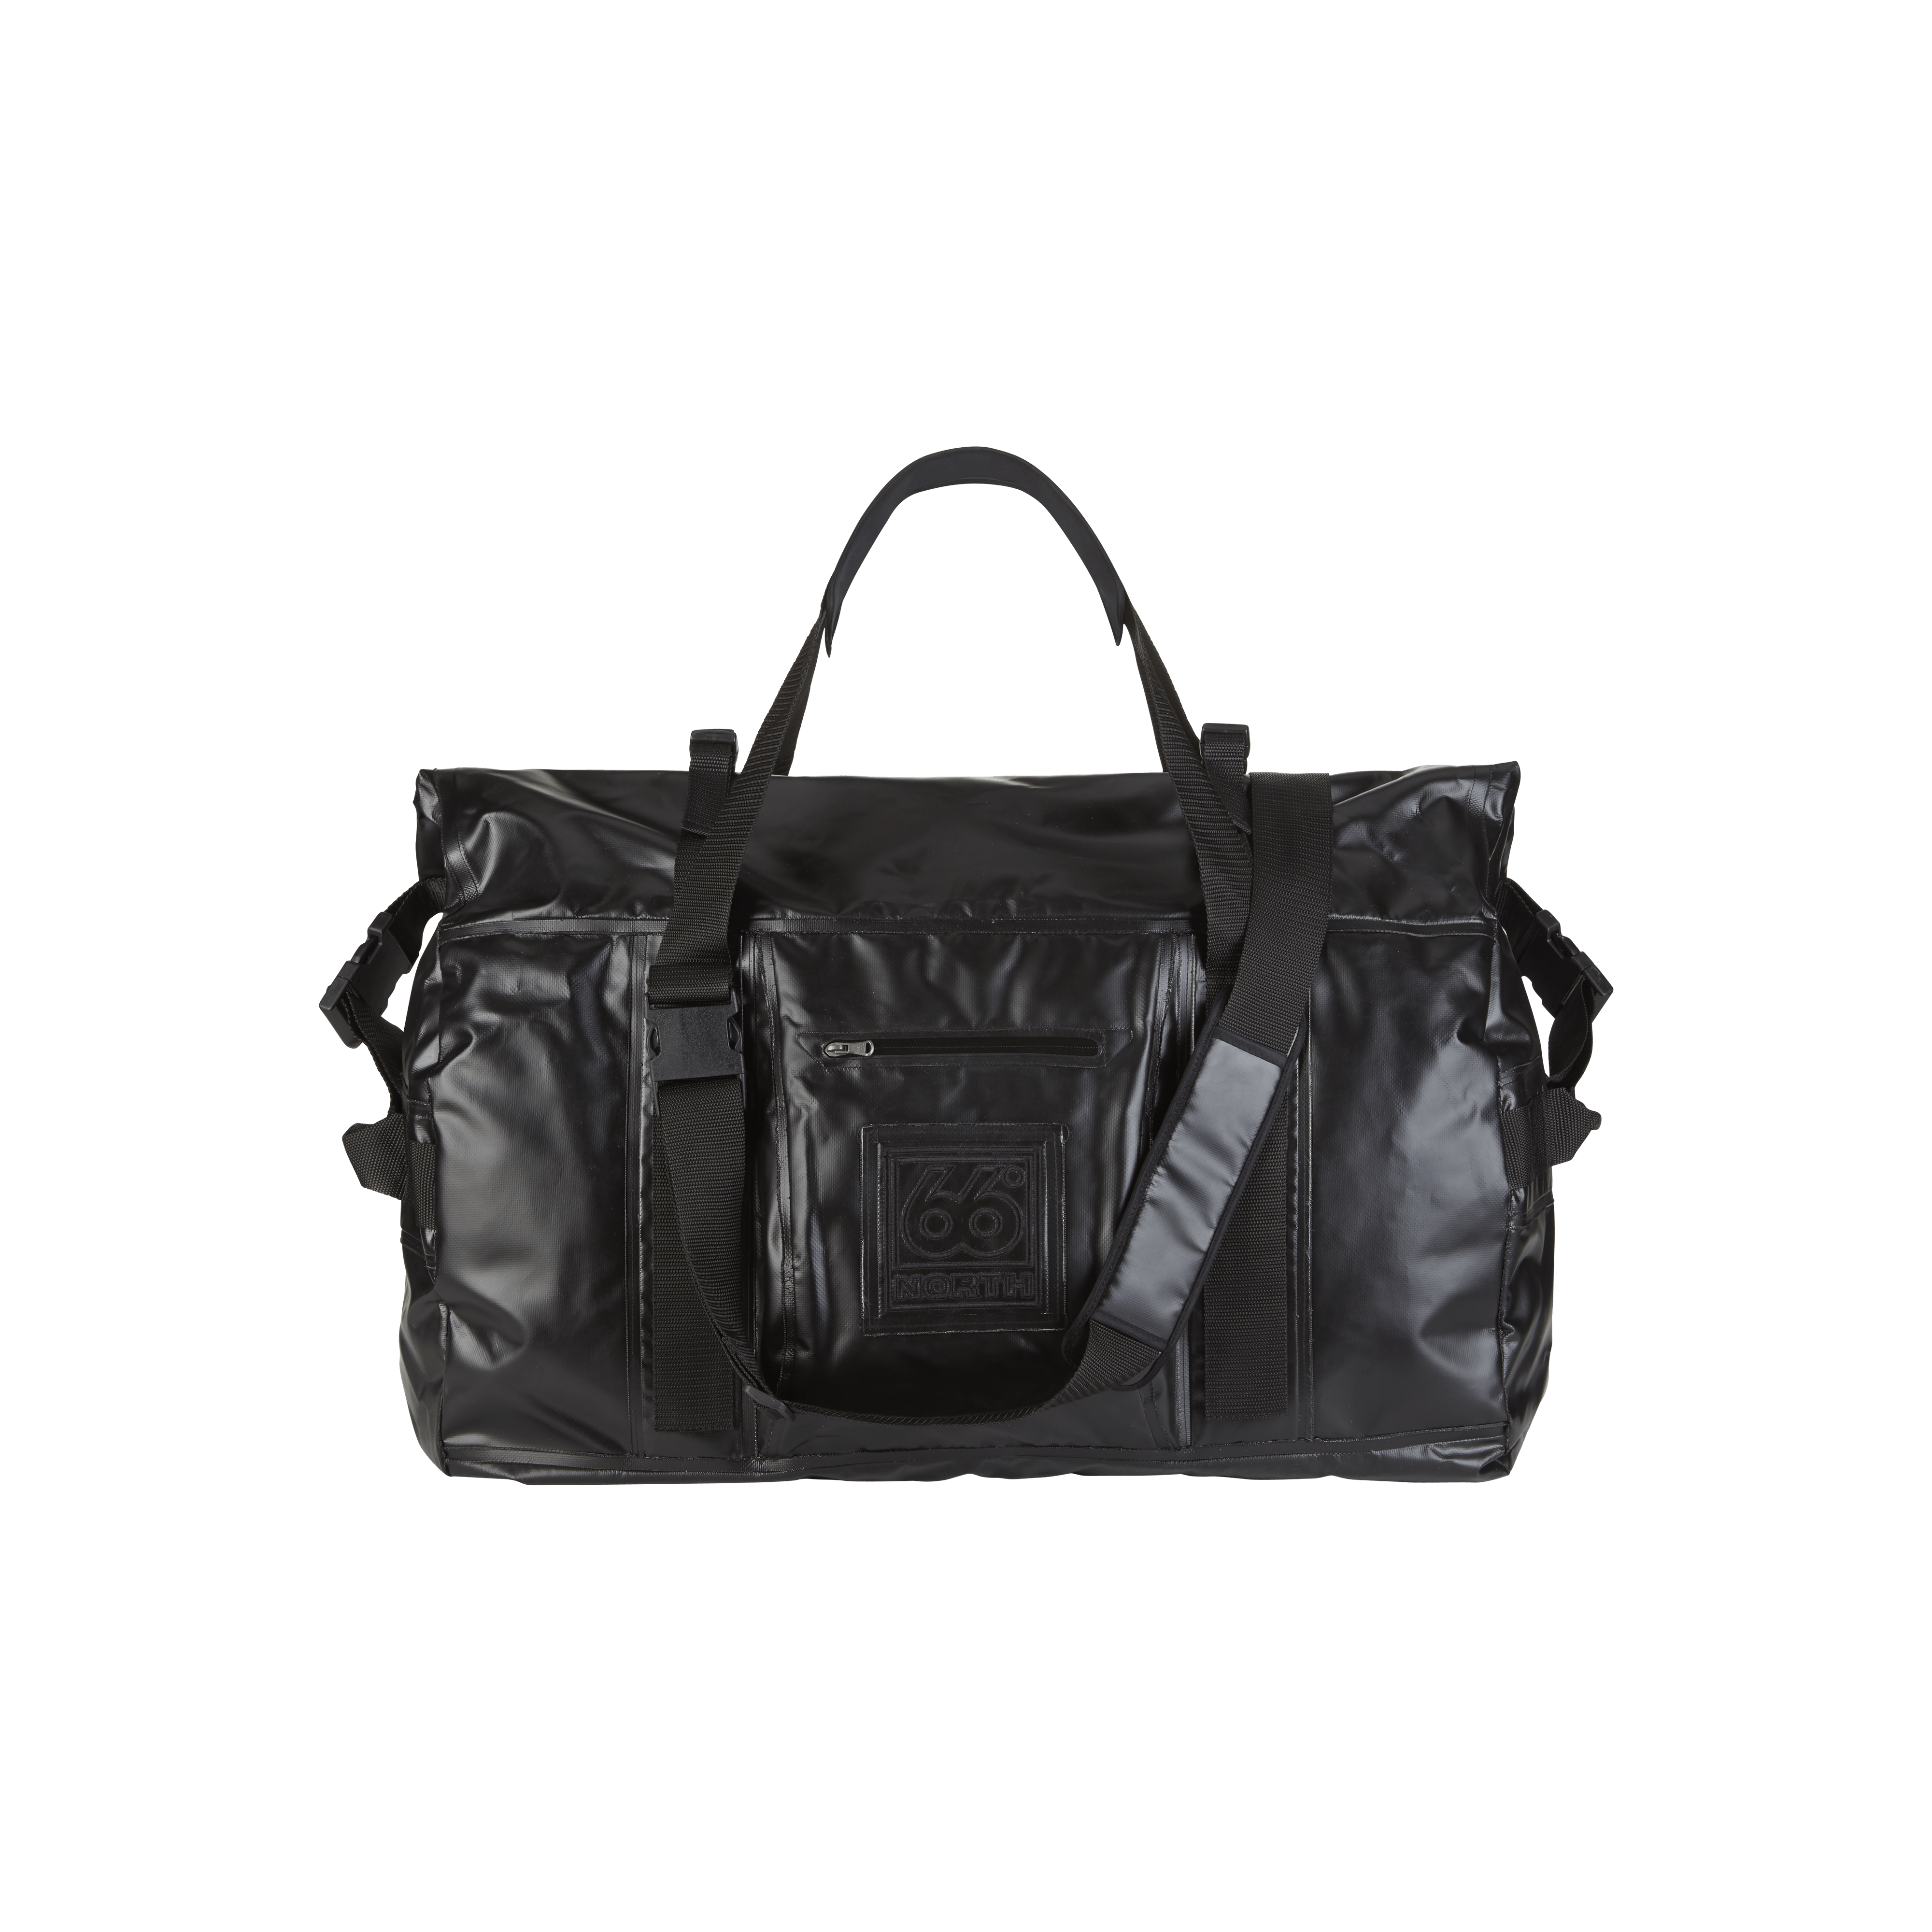 66 North Womens Duffle Bag Accessories - Black - One Size